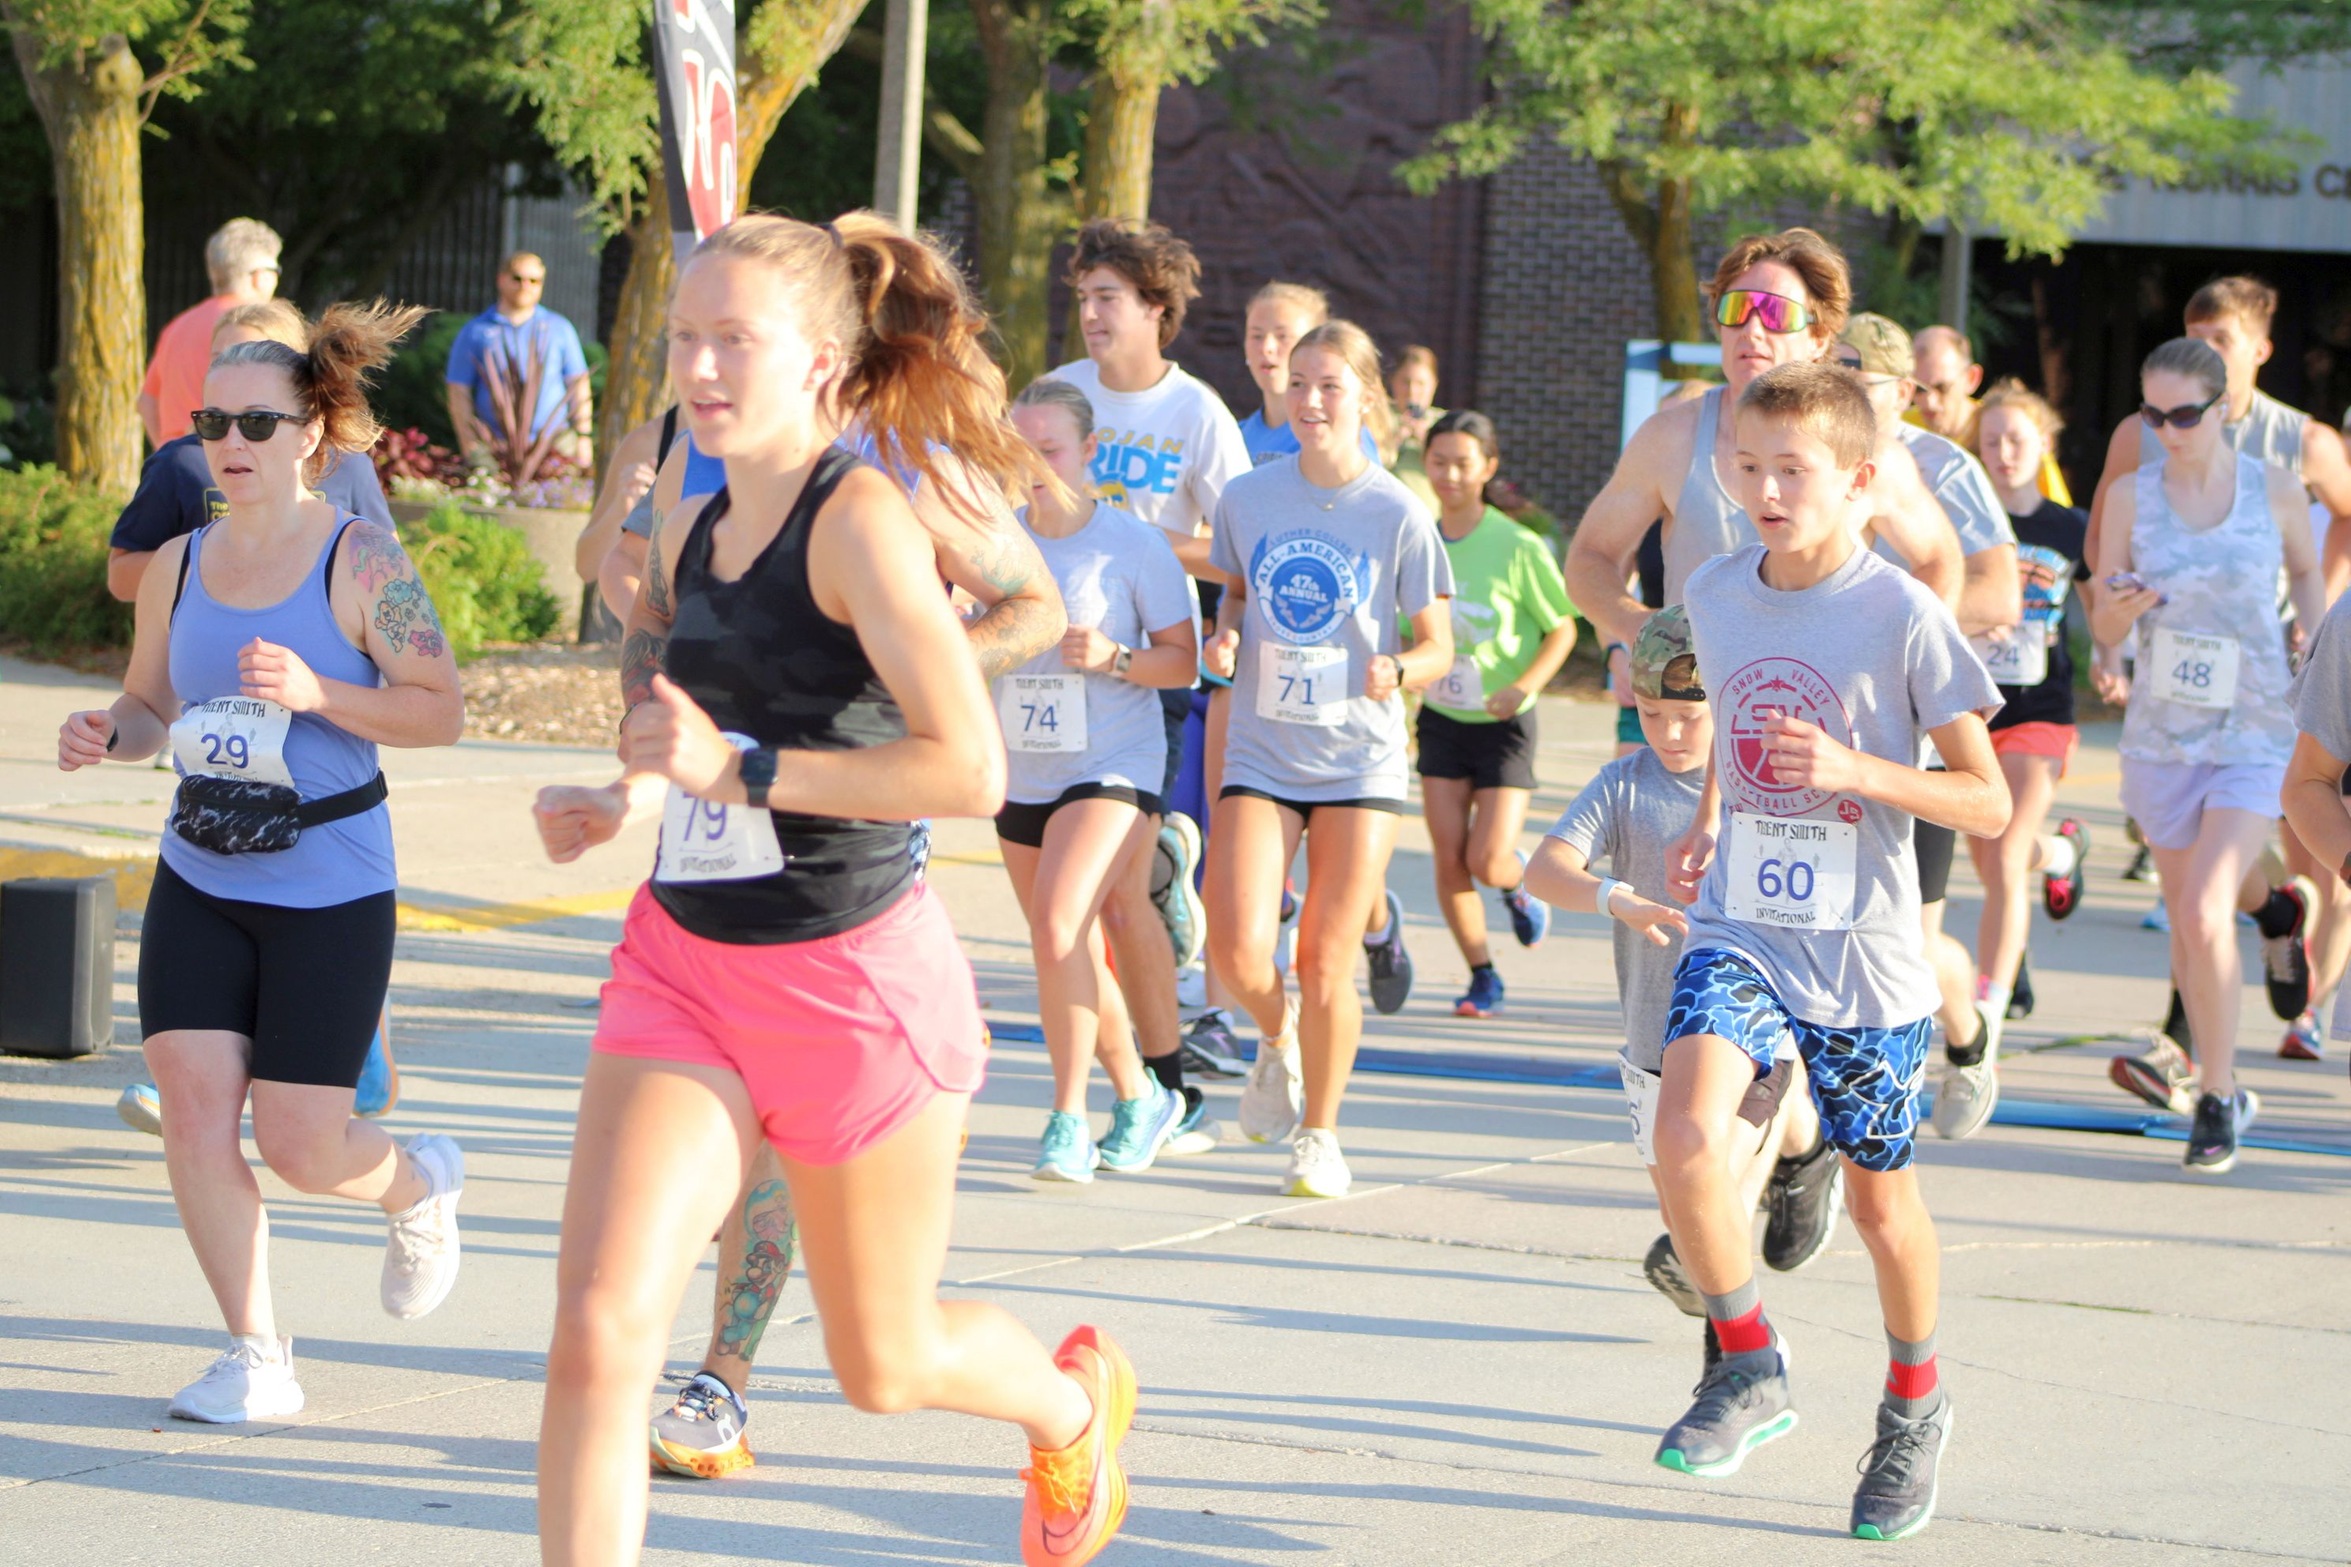 Audra Mulholland (front) of Mason City was the 10K female winner at Saturday's Robert's Run on the NIACC campus.